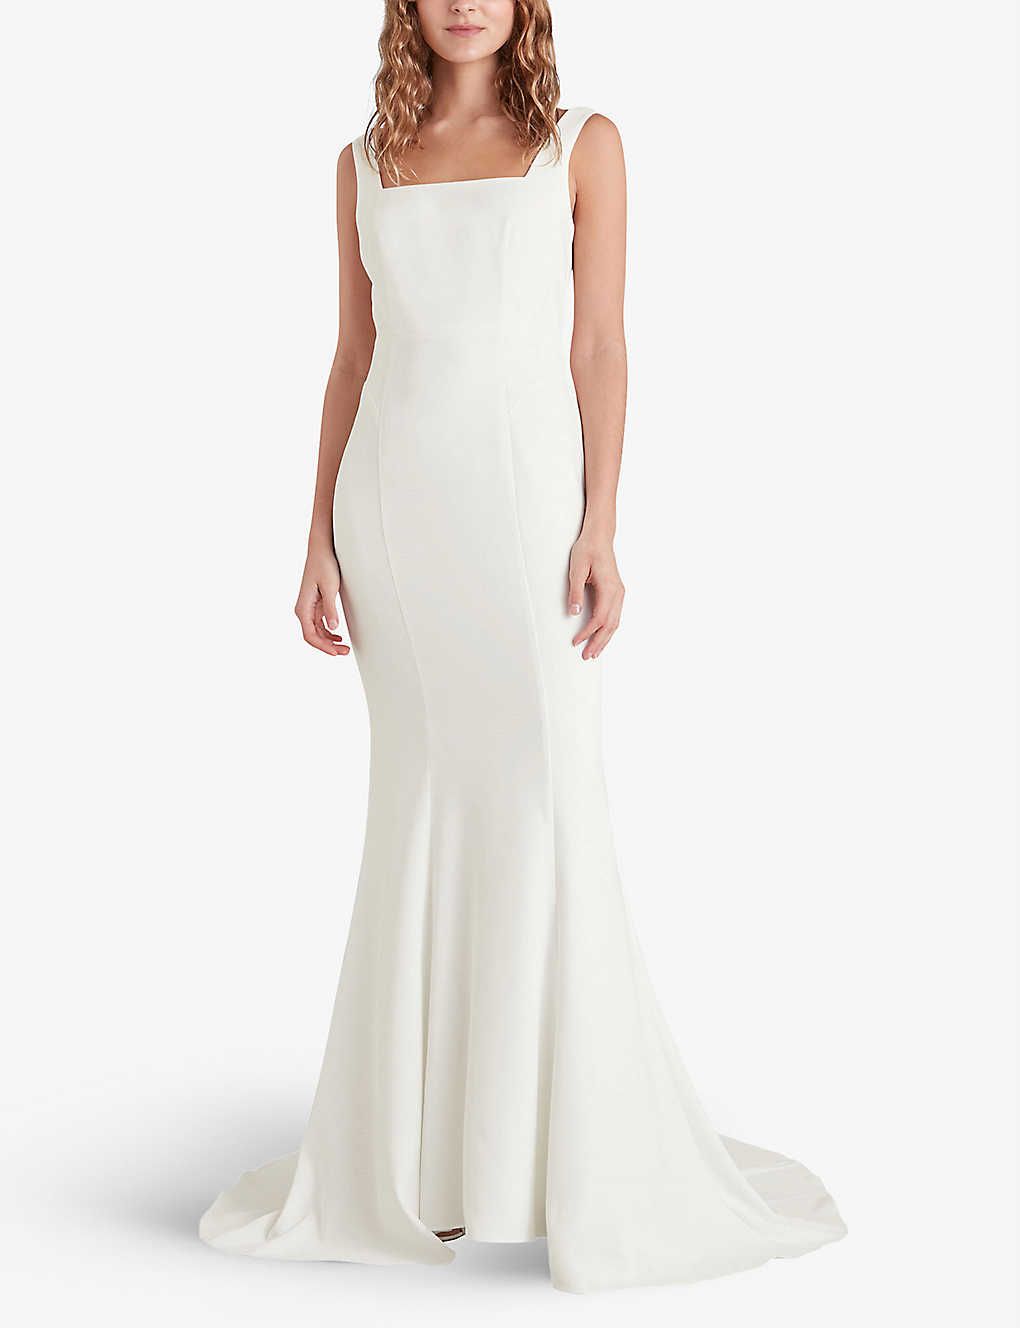 Mia square-neck lace and crepe wedding gown | Selfridges